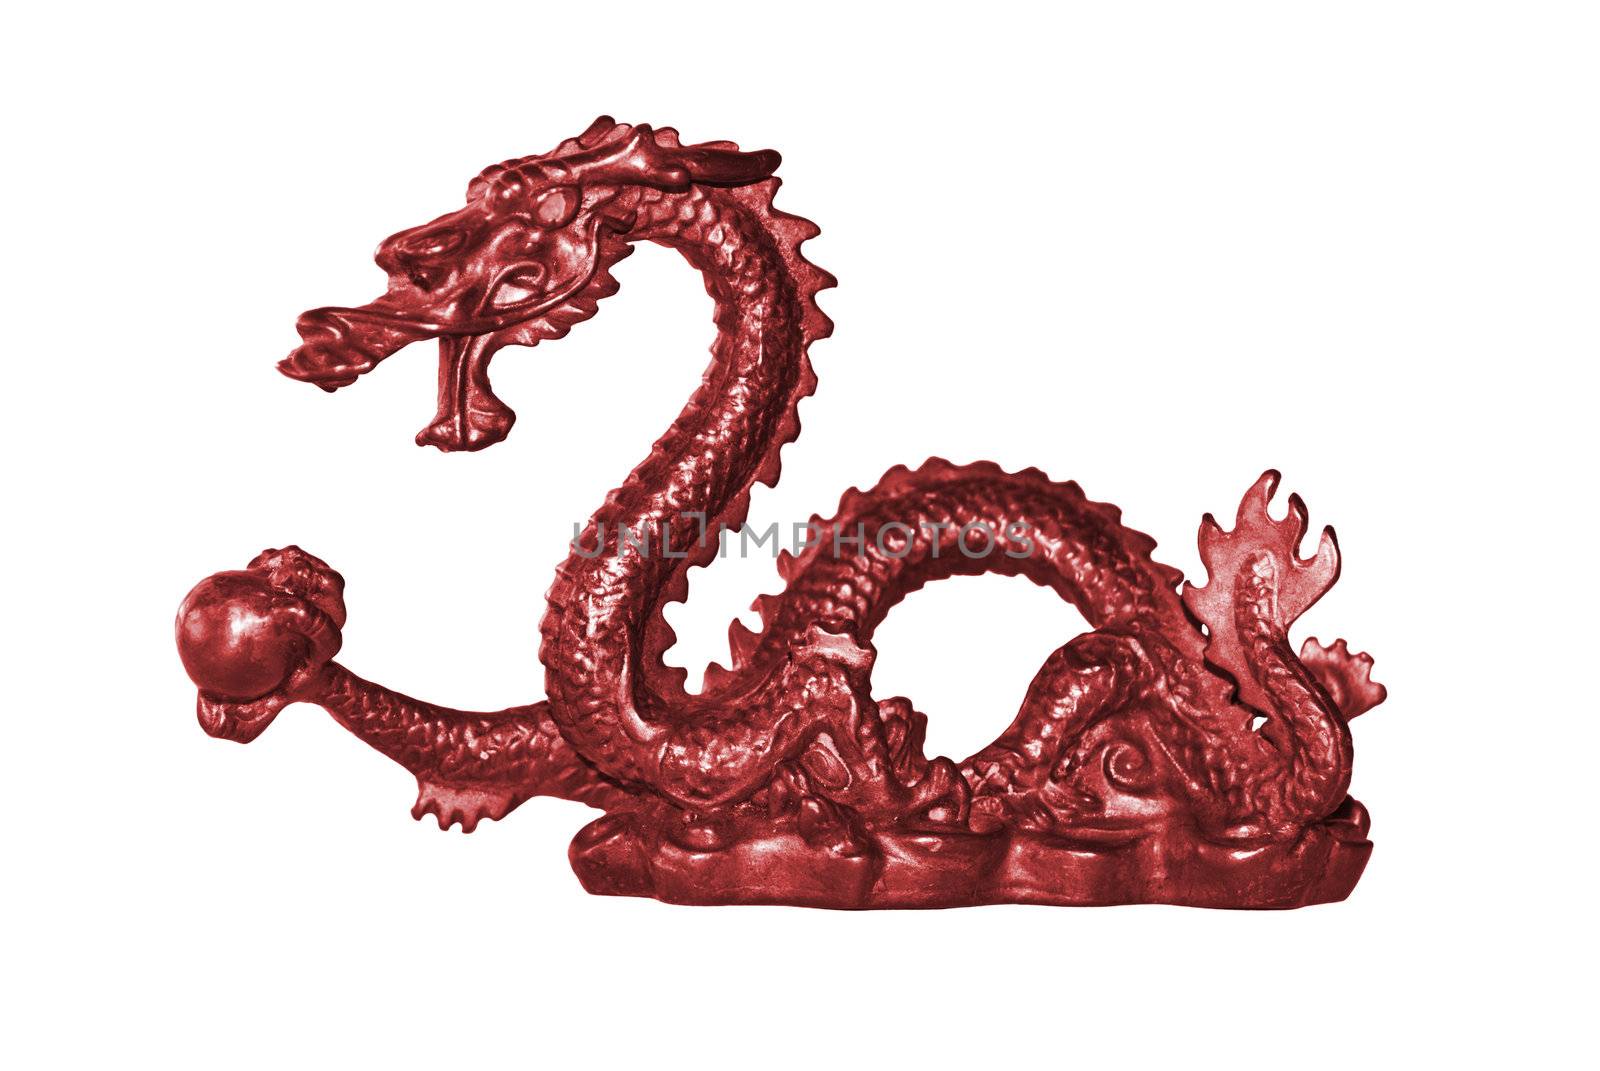 Chinese red dragon, symbol of New Year 2012